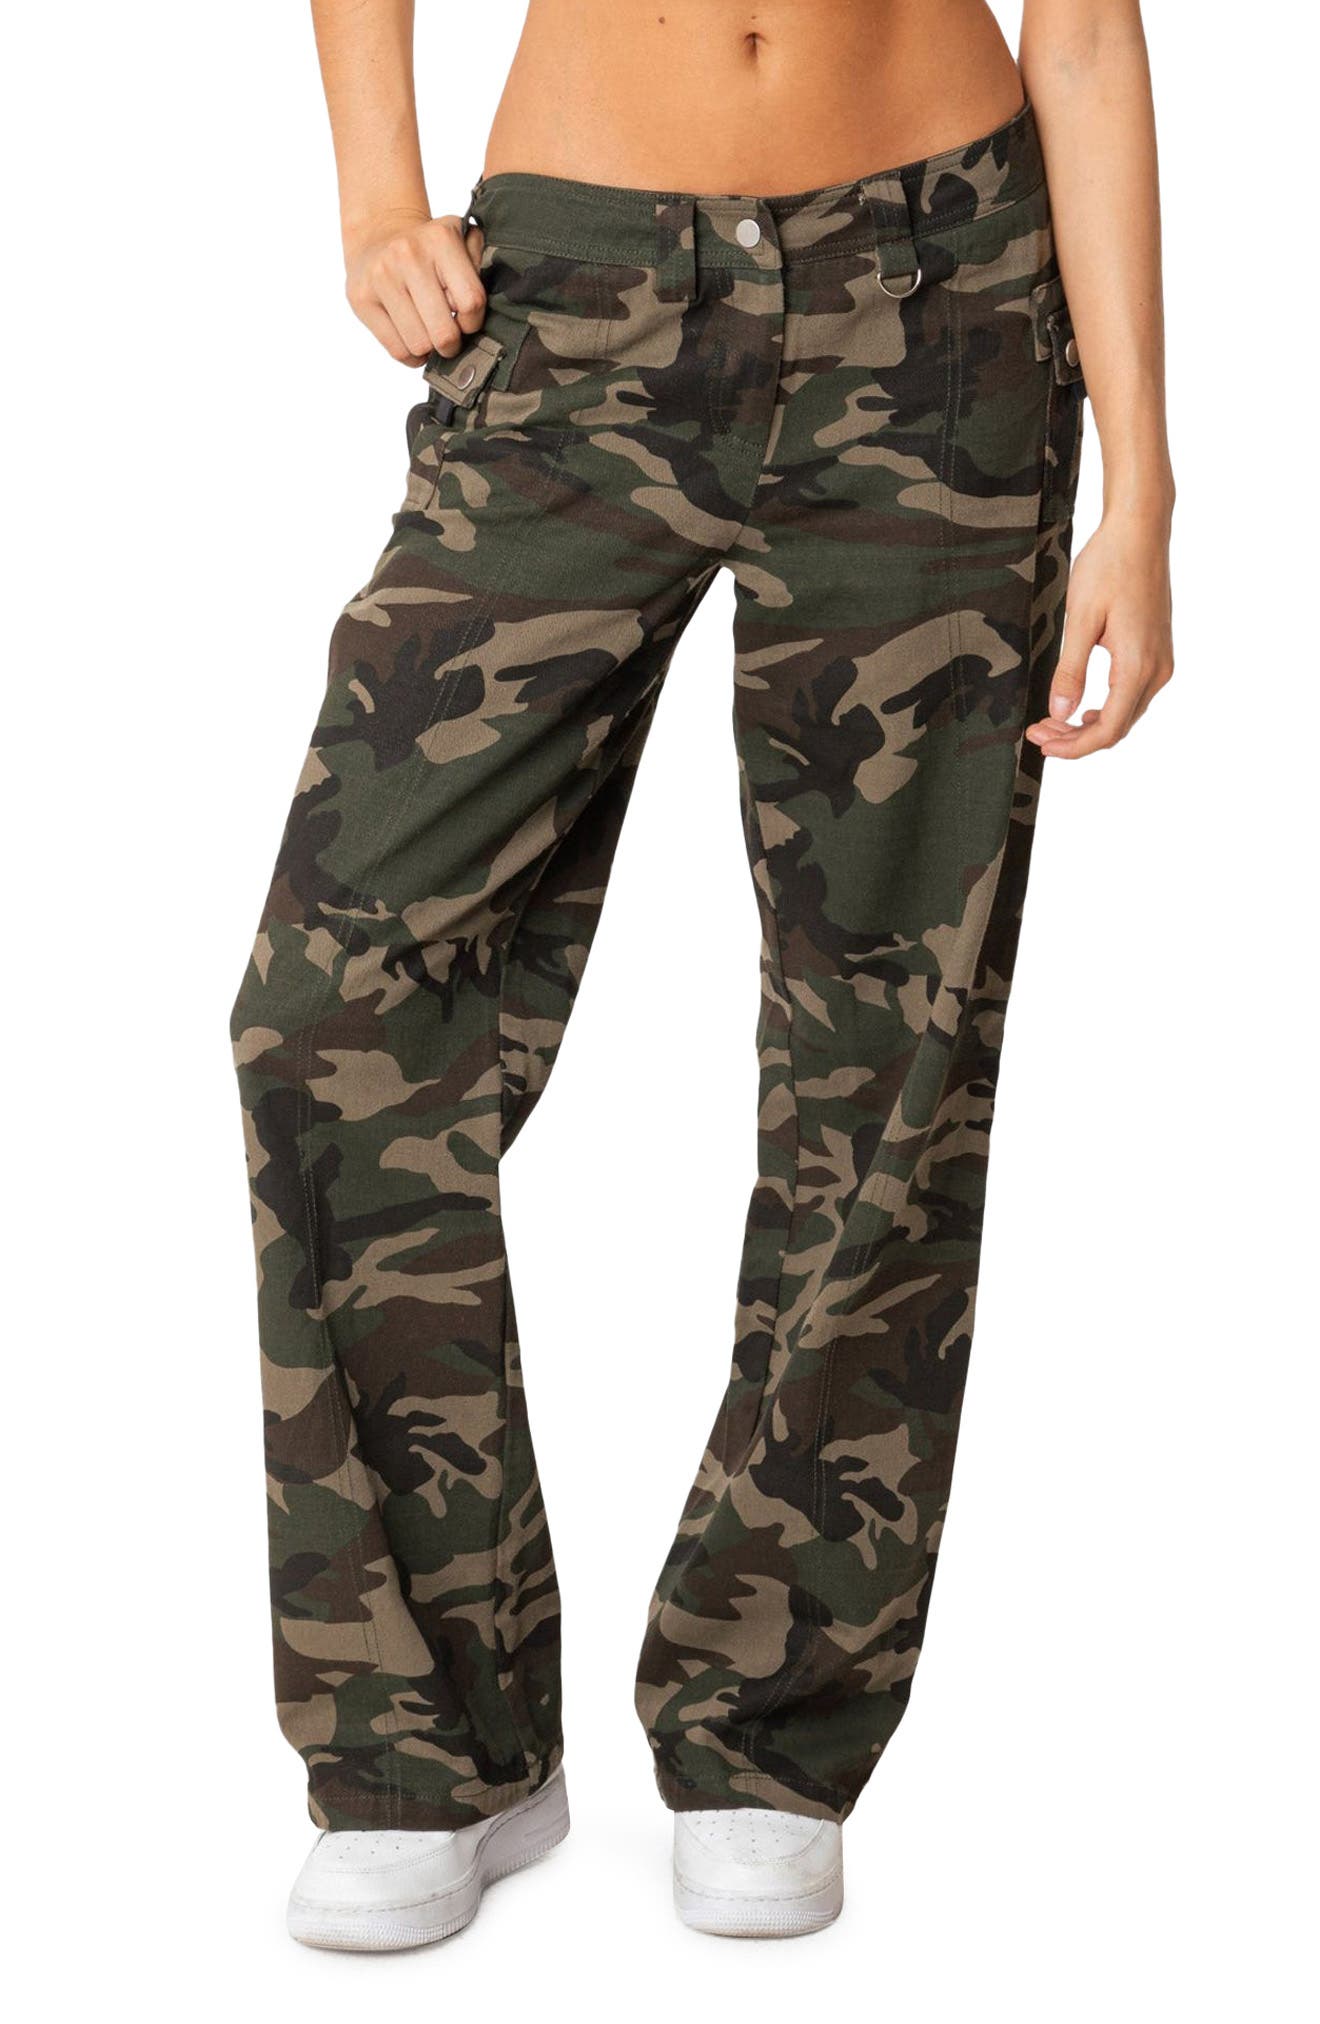 sizes UK 4 6 8 10 12 Women's lightweight skinny distressed camouflage Trousers 